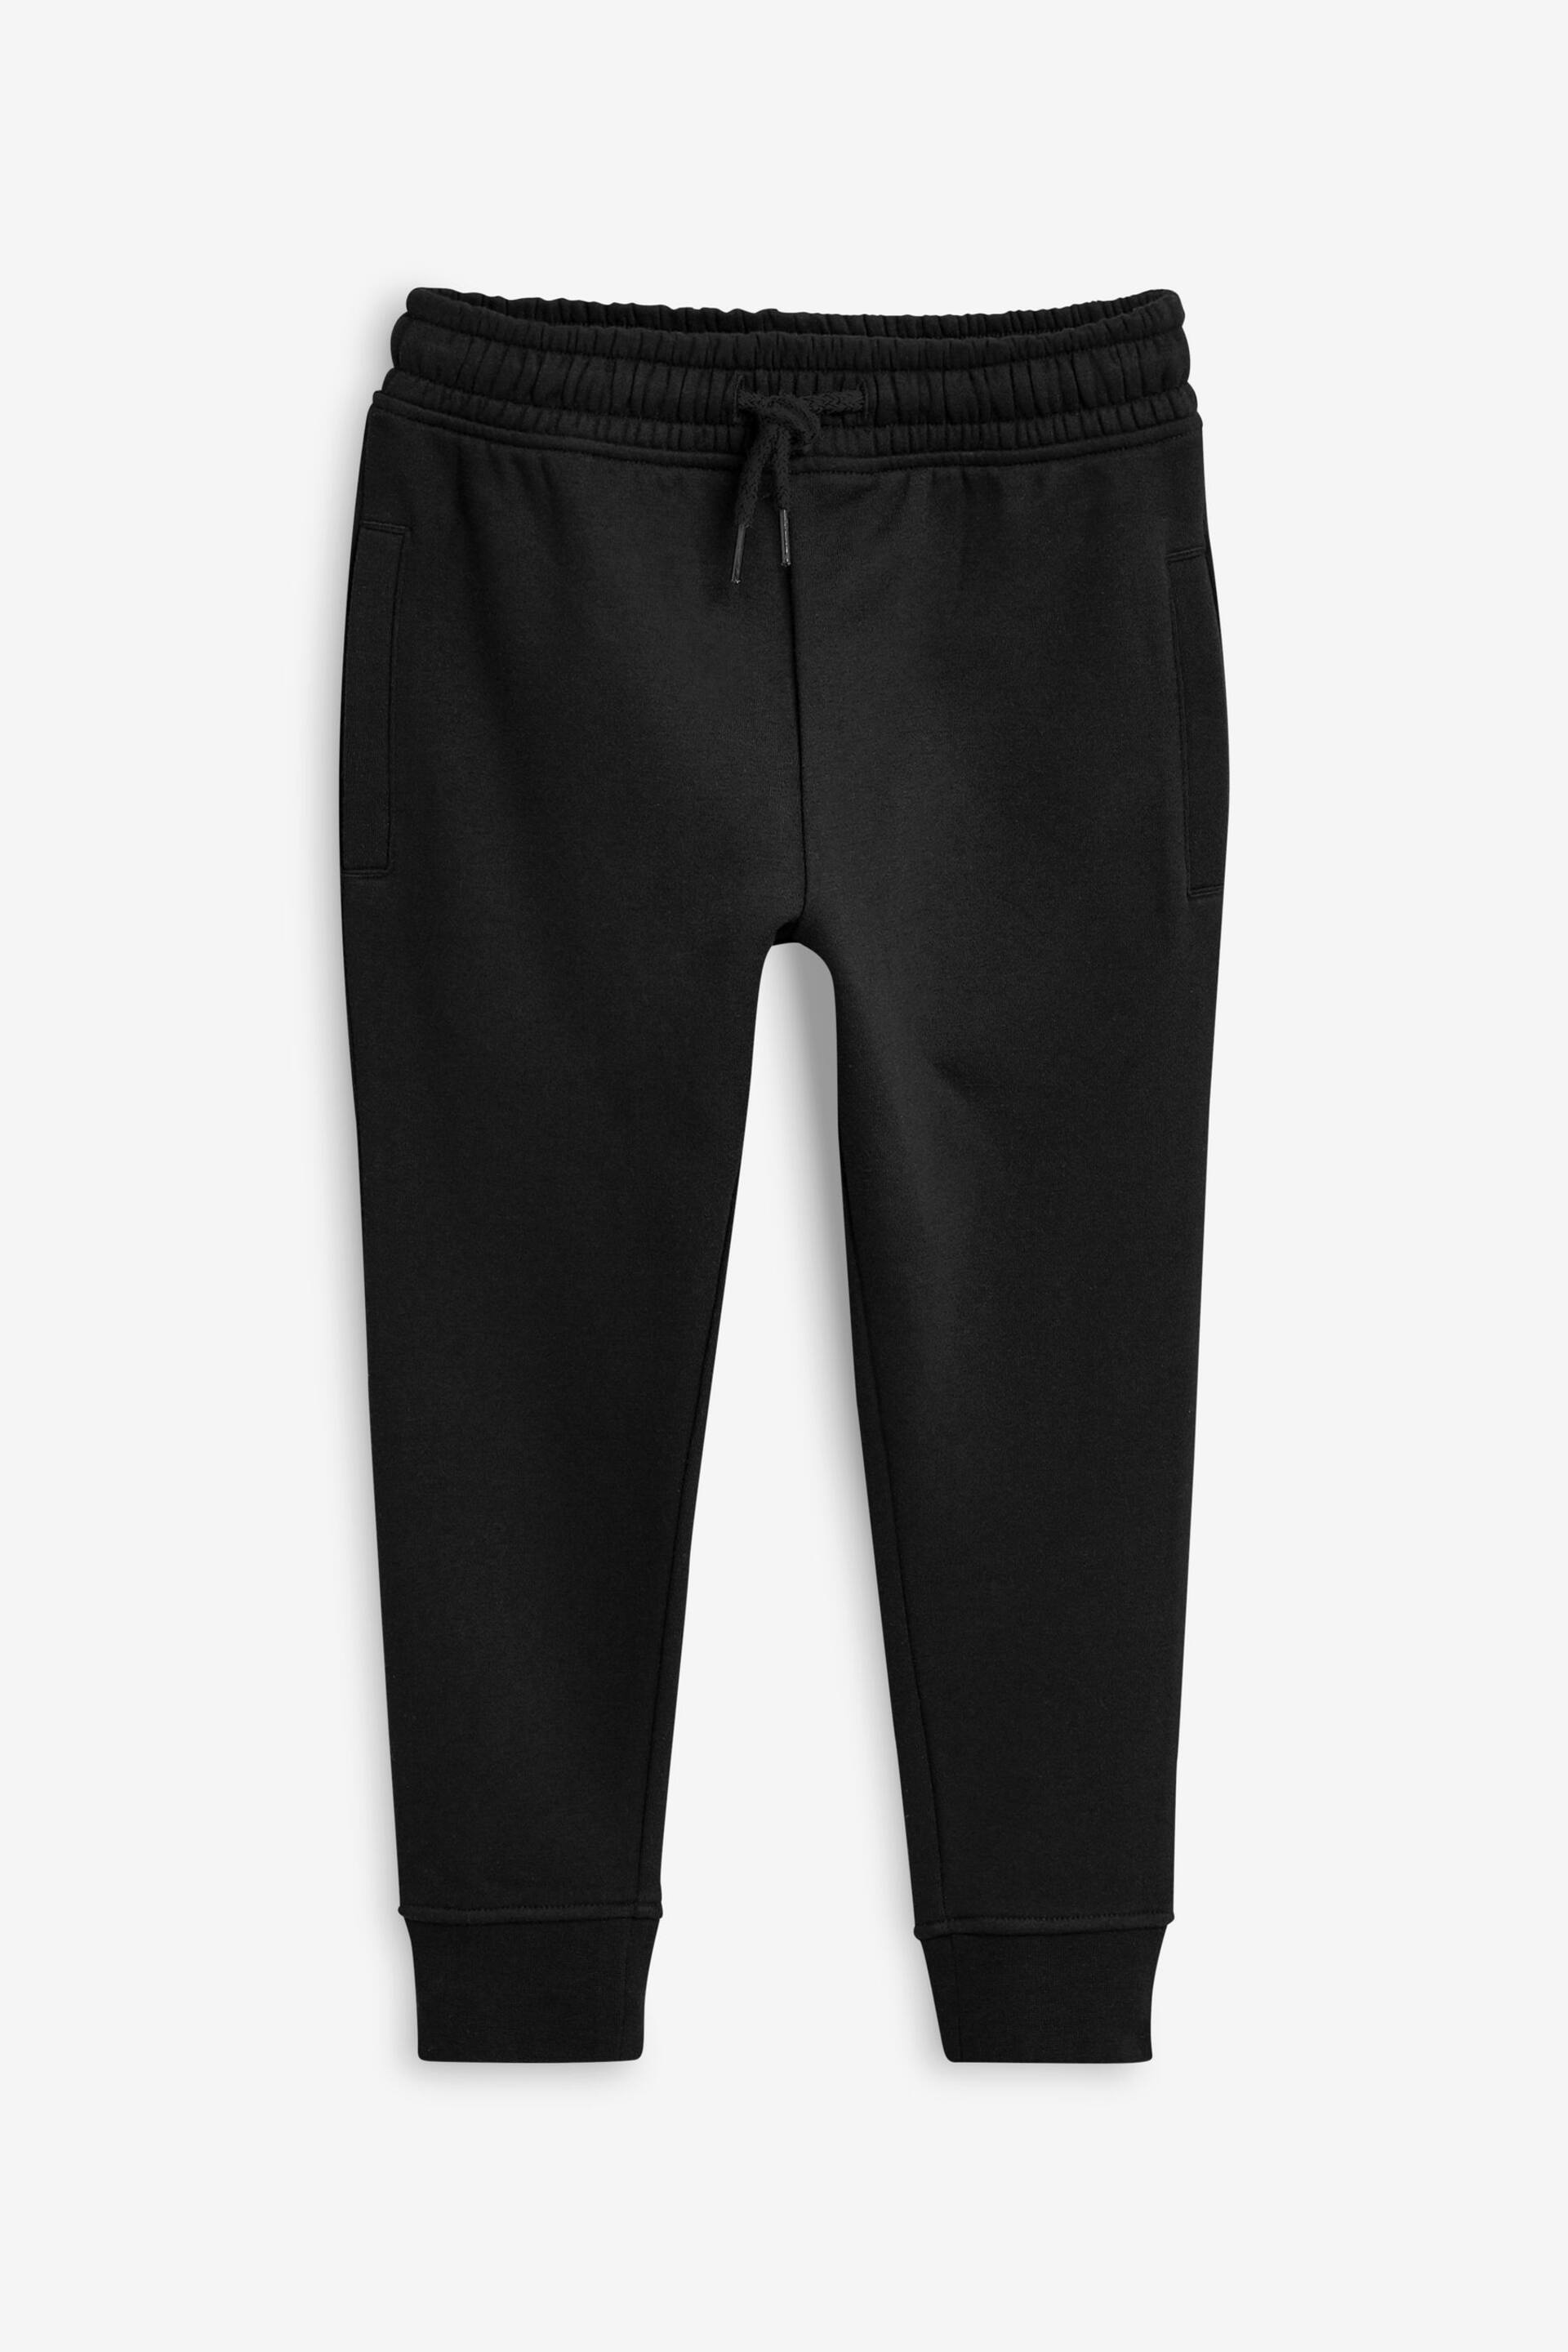 Black Skinny Fit Cuffed Joggers (3-16yrs) - Image 5 of 7